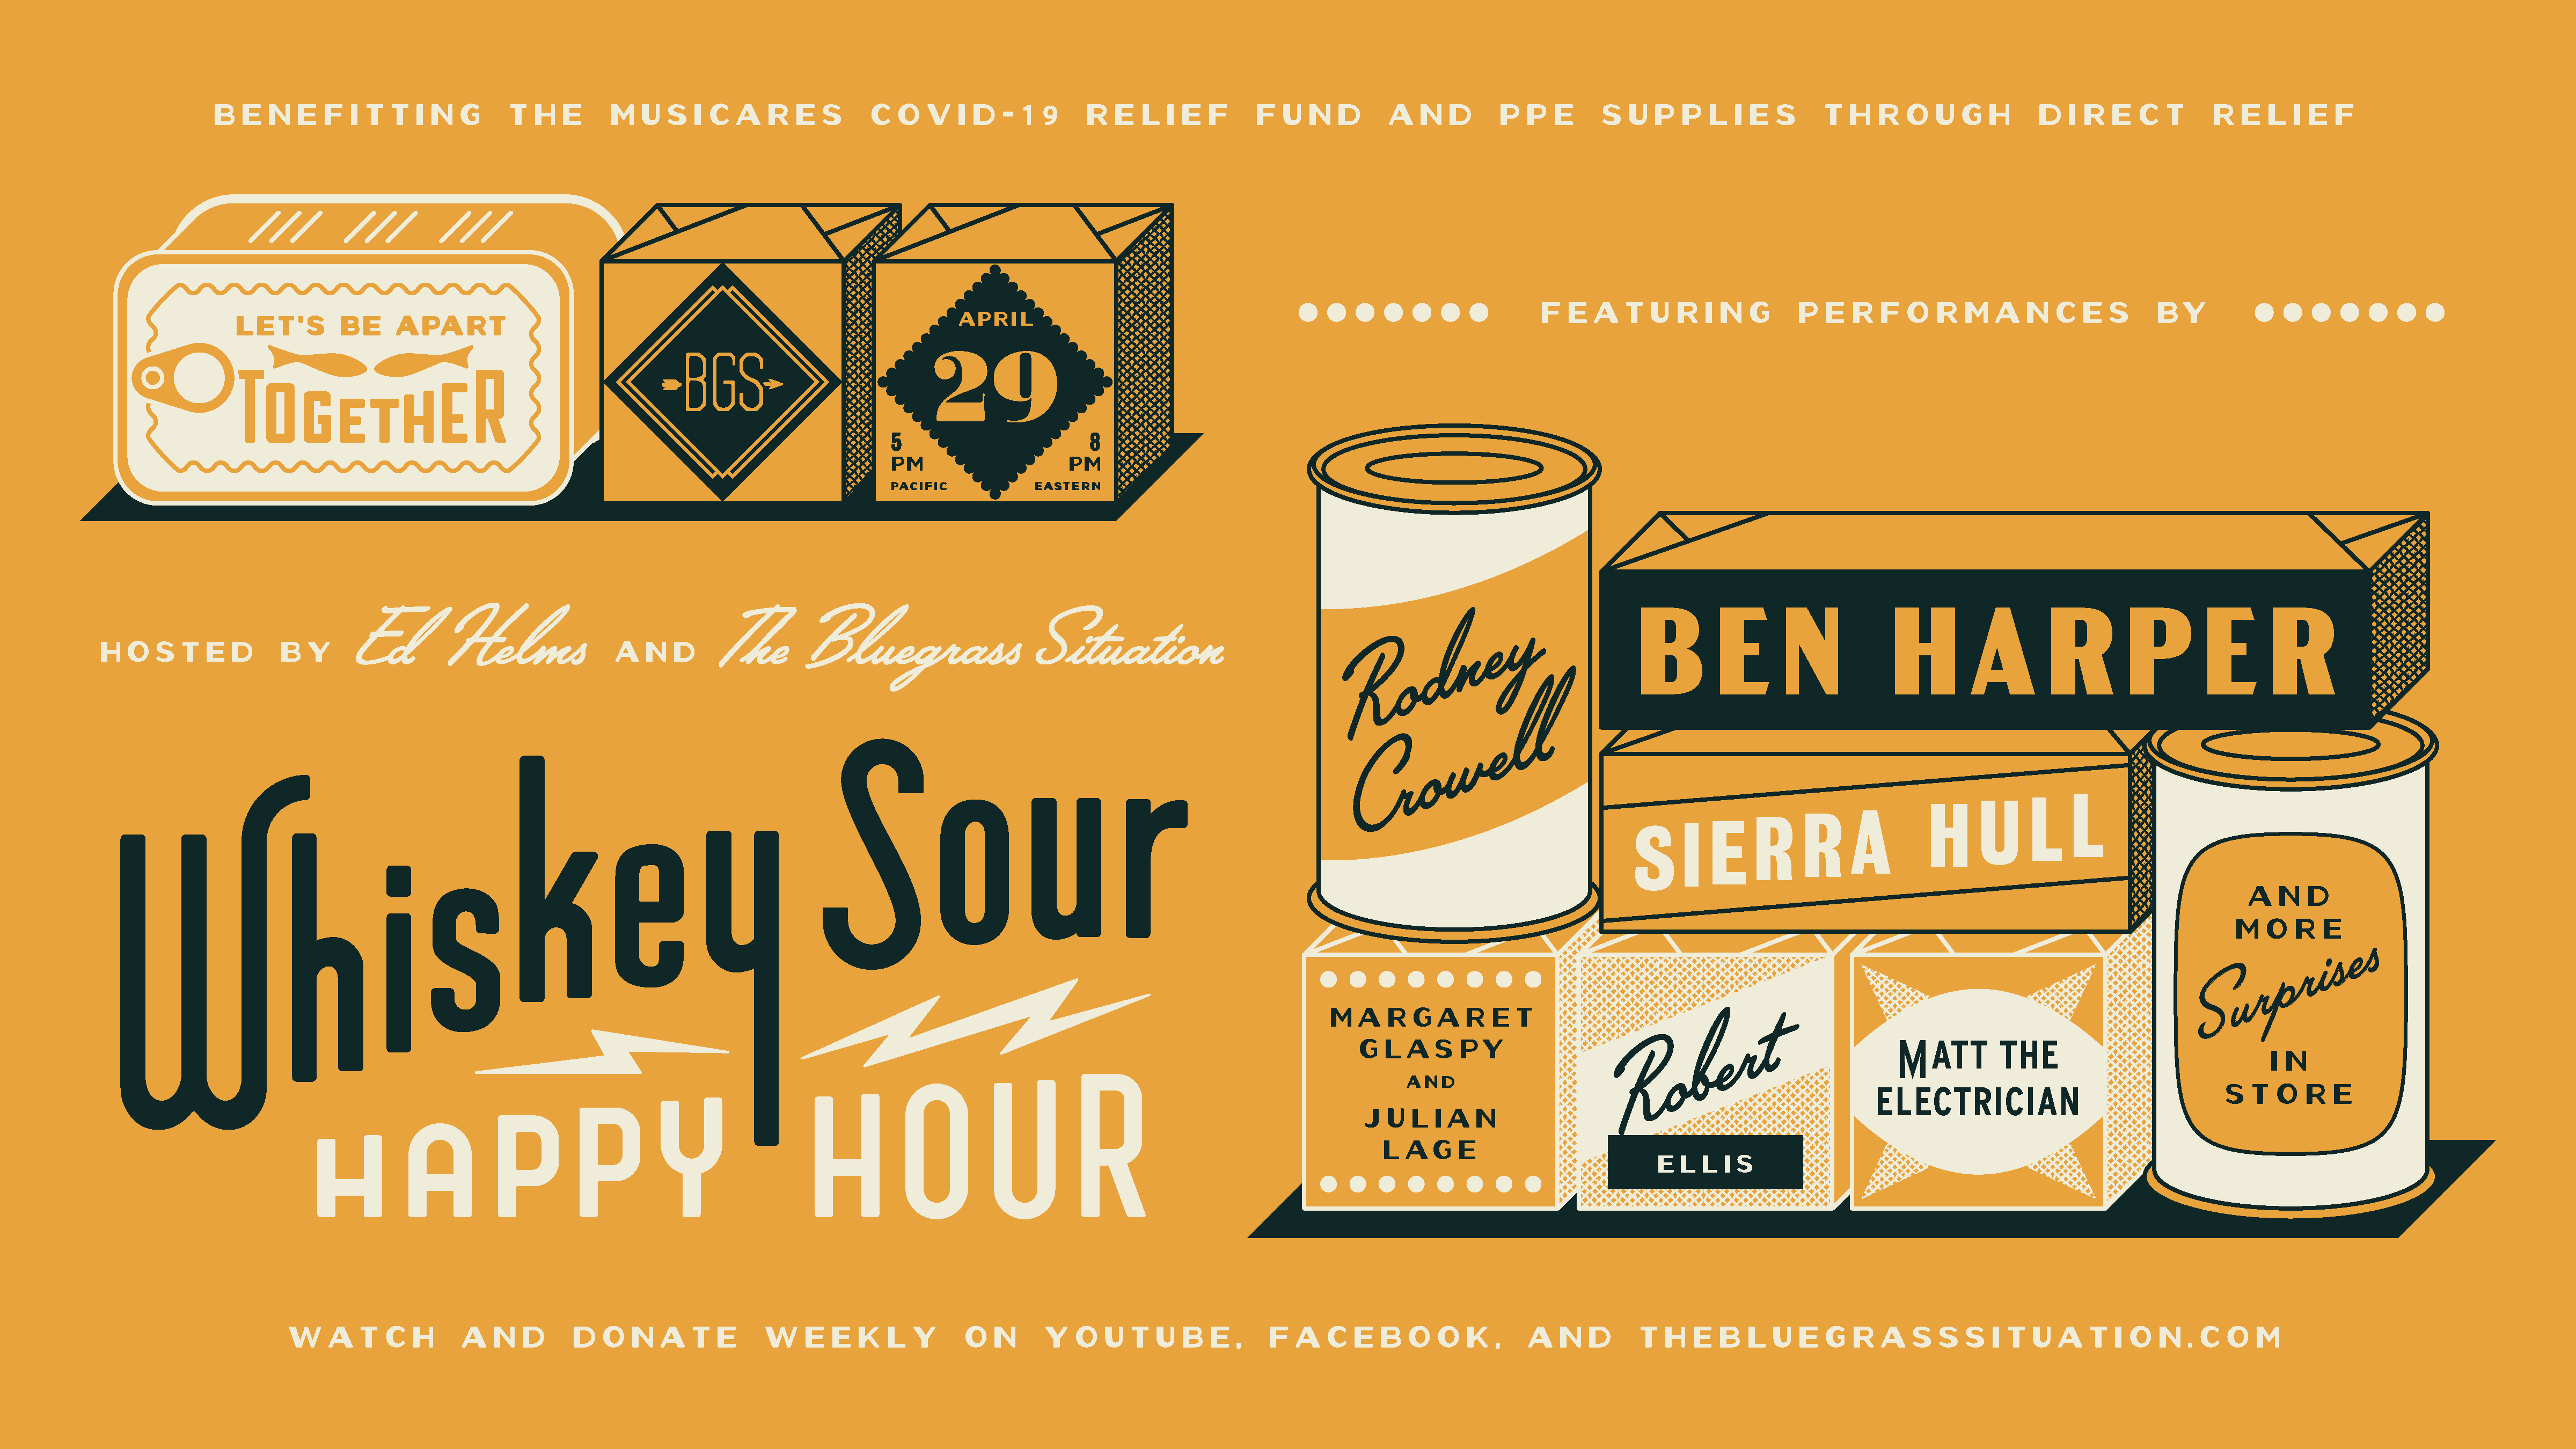 WATCH: Whiskey Sour Happy Hour, Episode 2 - The Bluegrass Situation